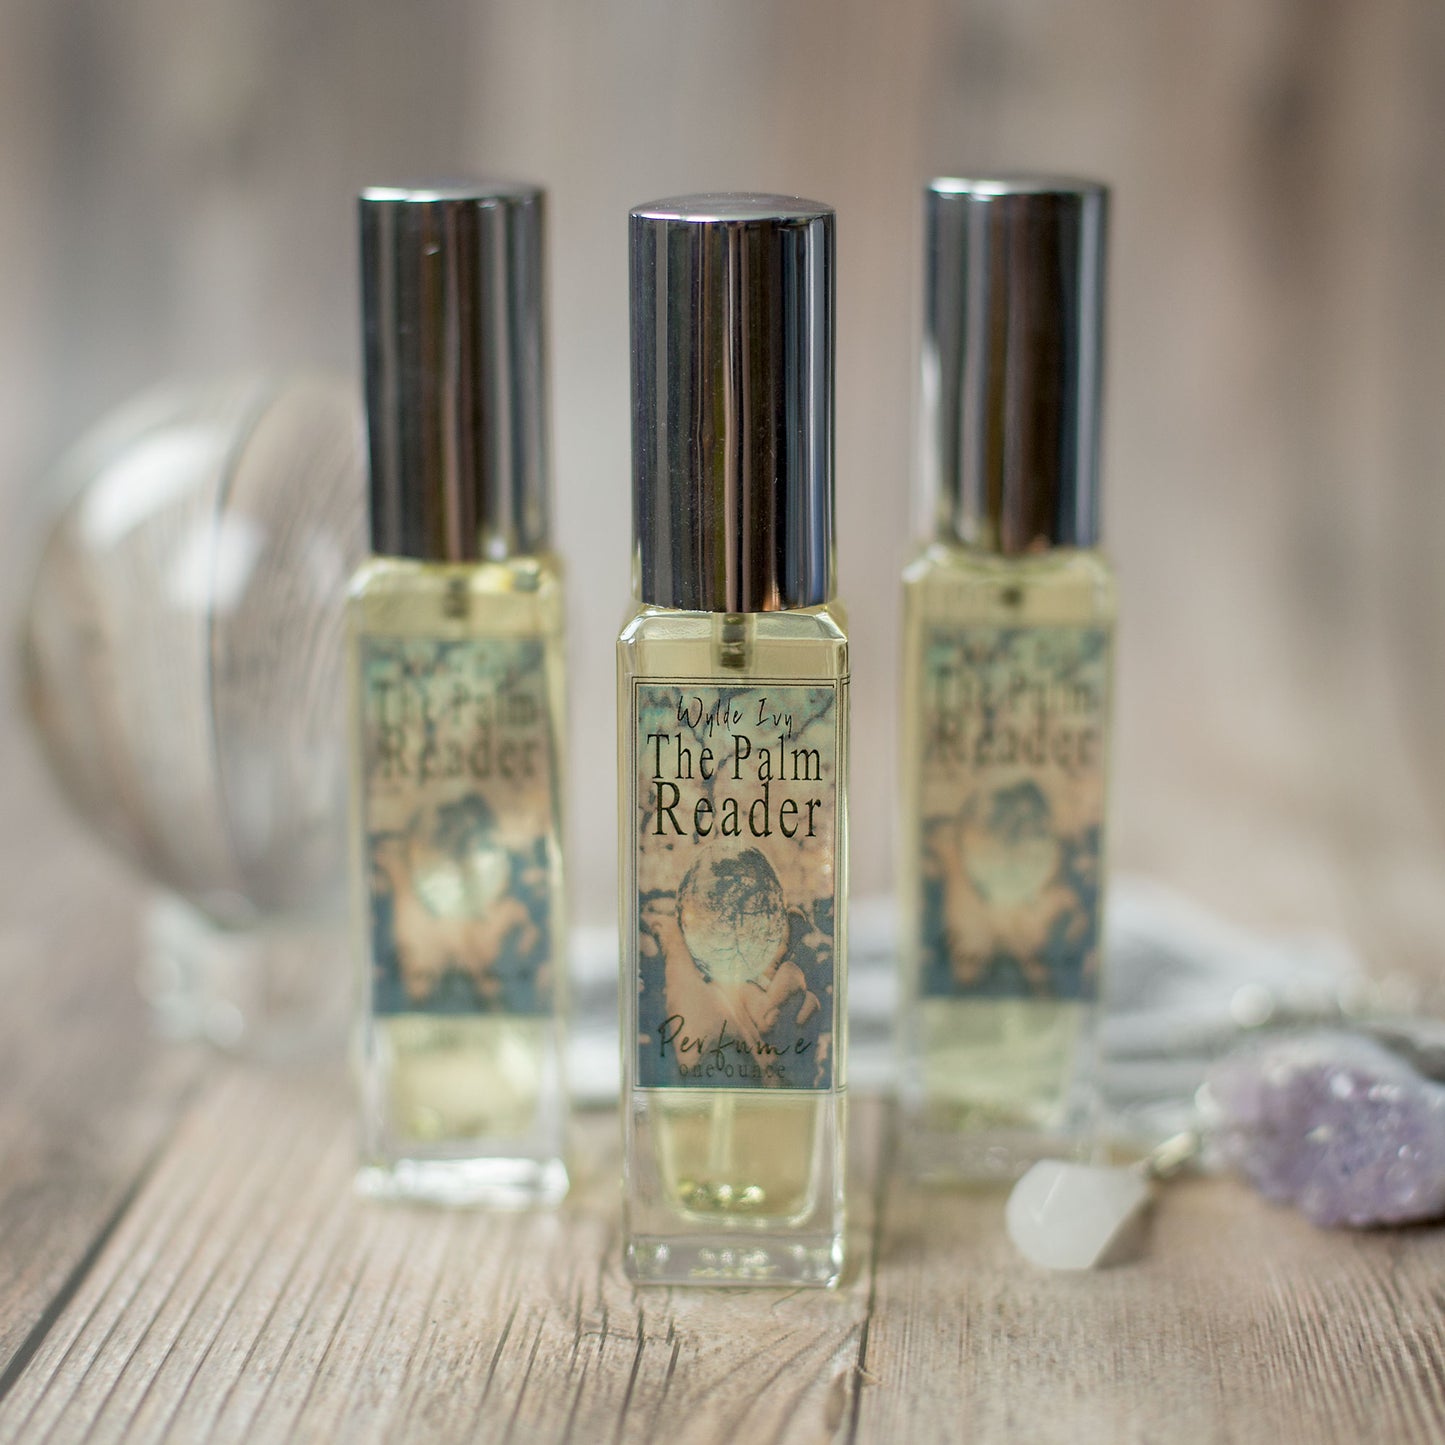 The Palm Reader Perfume